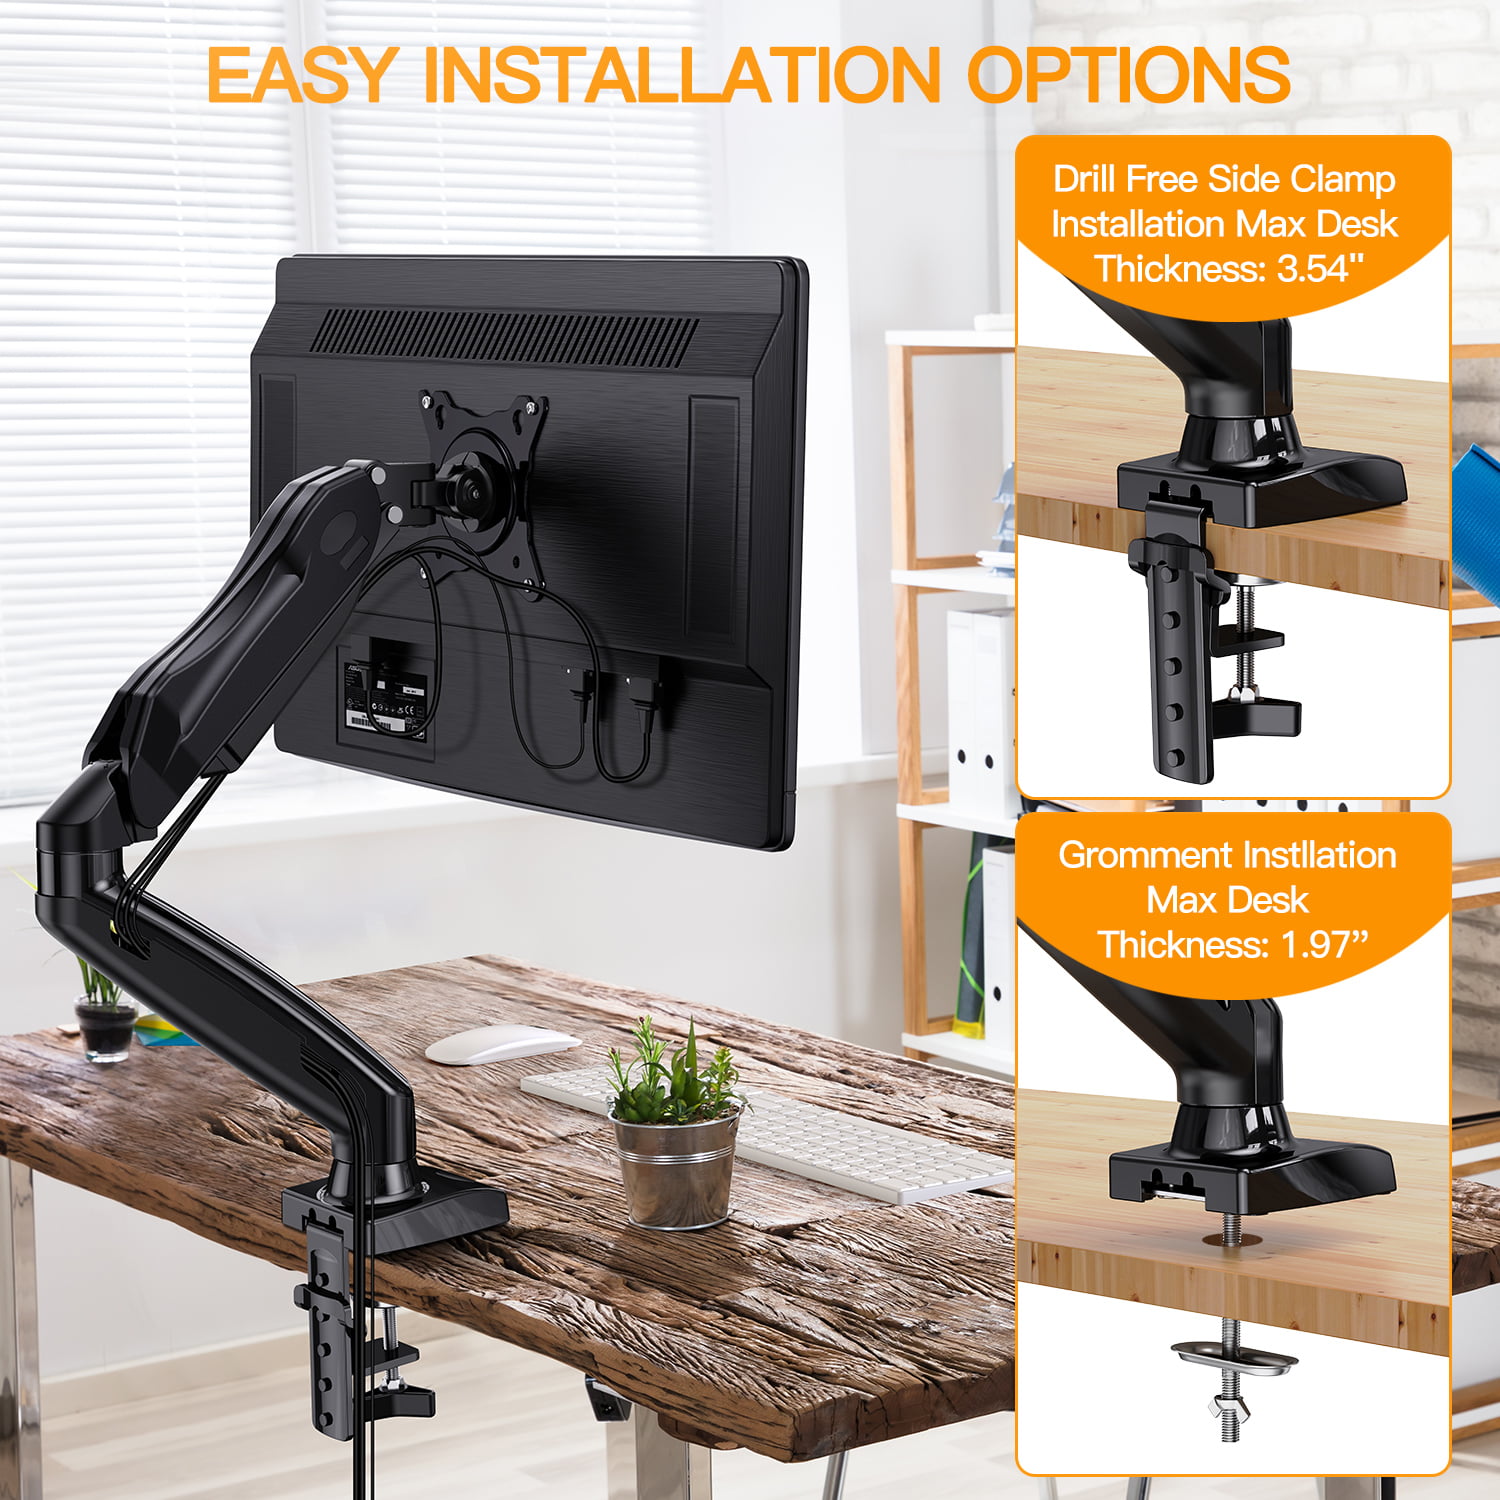 Swivel VESA Mount with C Clamp ErGear Dual Arm Monitor Mount Stand Adjustable Gas Spring Monitor Desk Mount Grommet Mounting For Most 17-27 Inch Flat Curved Computer Monitor Screens up to 14.3lbs 